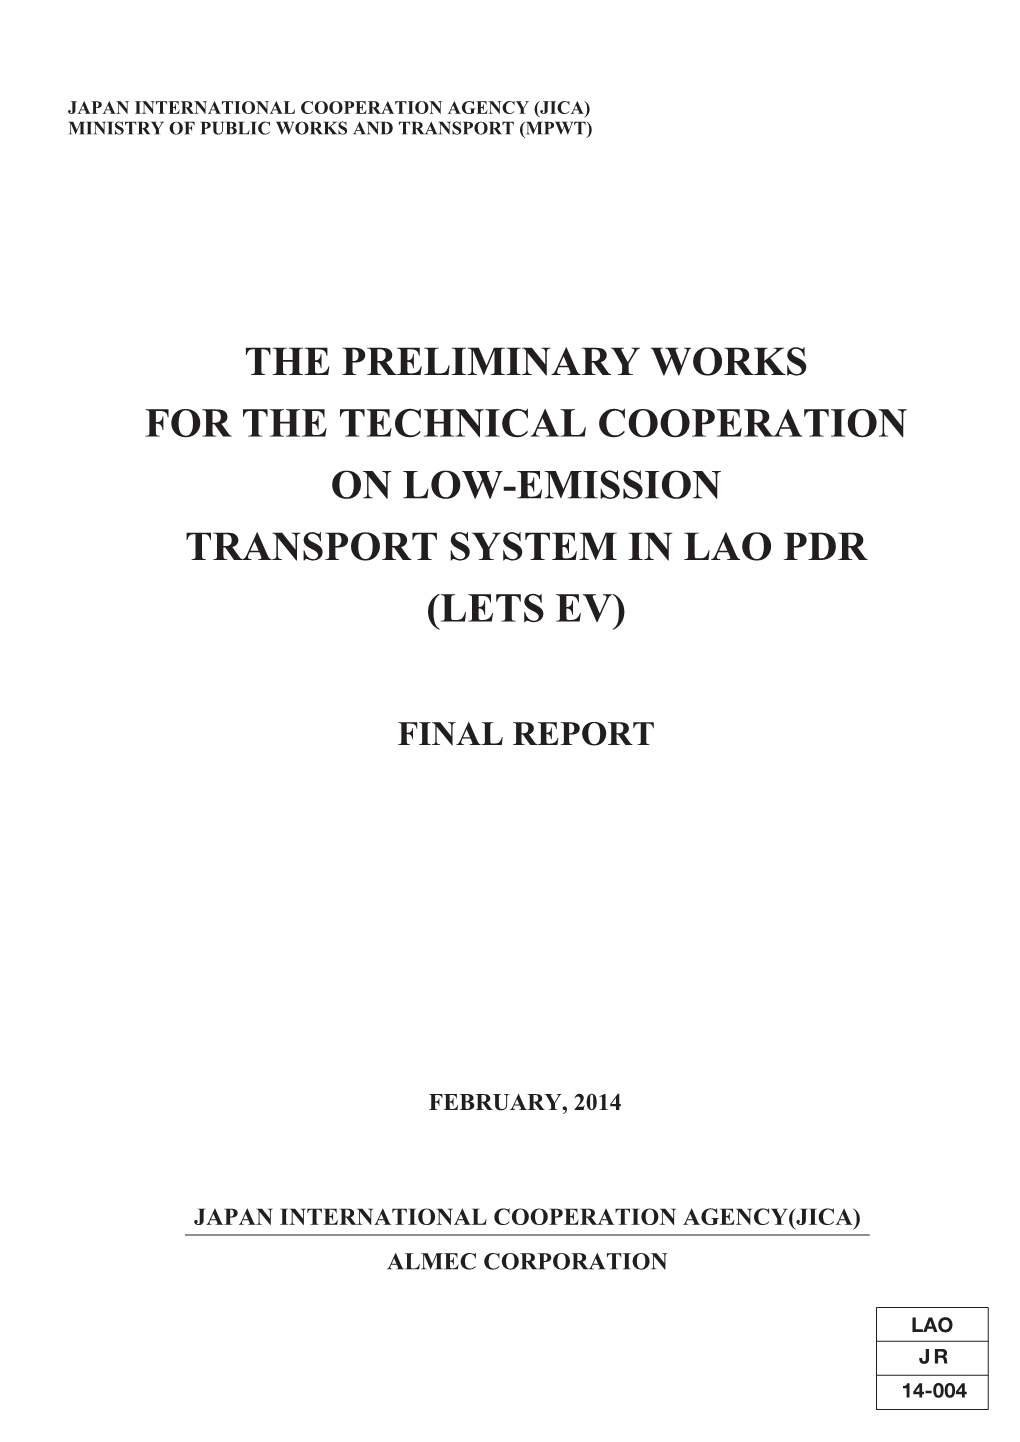 The Preliminary Works for the Technical Cooperation on Low-Emission Transport System in Lao Pdr (Lets Ev)